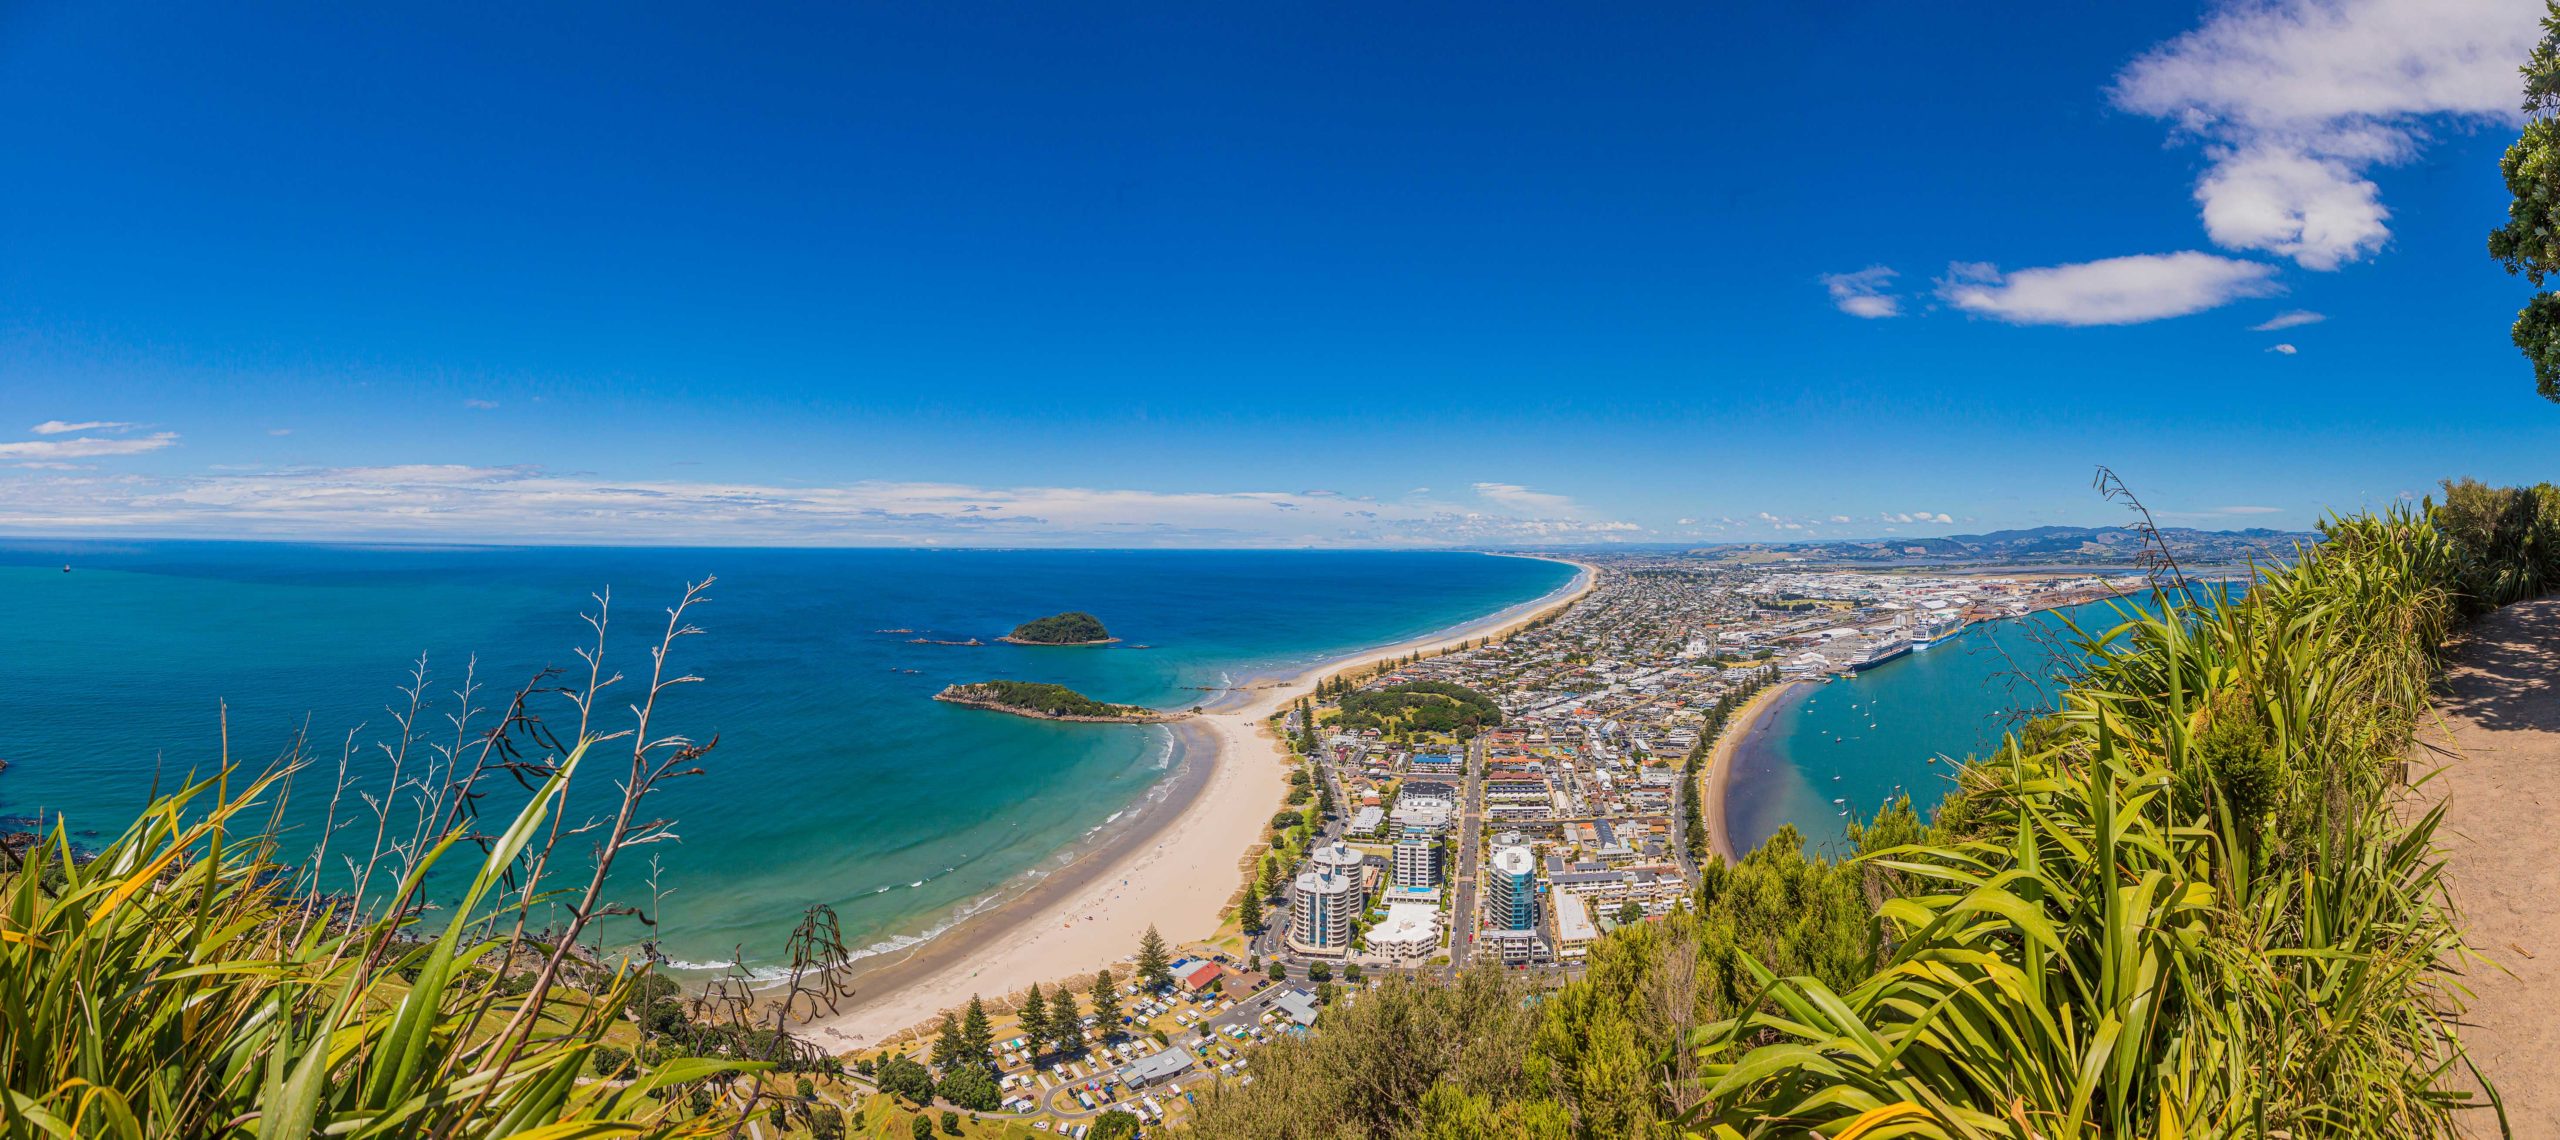 Mt. Maunganui and Tauranga residential homes and houses in the Bay of Plenty, New Zealand.